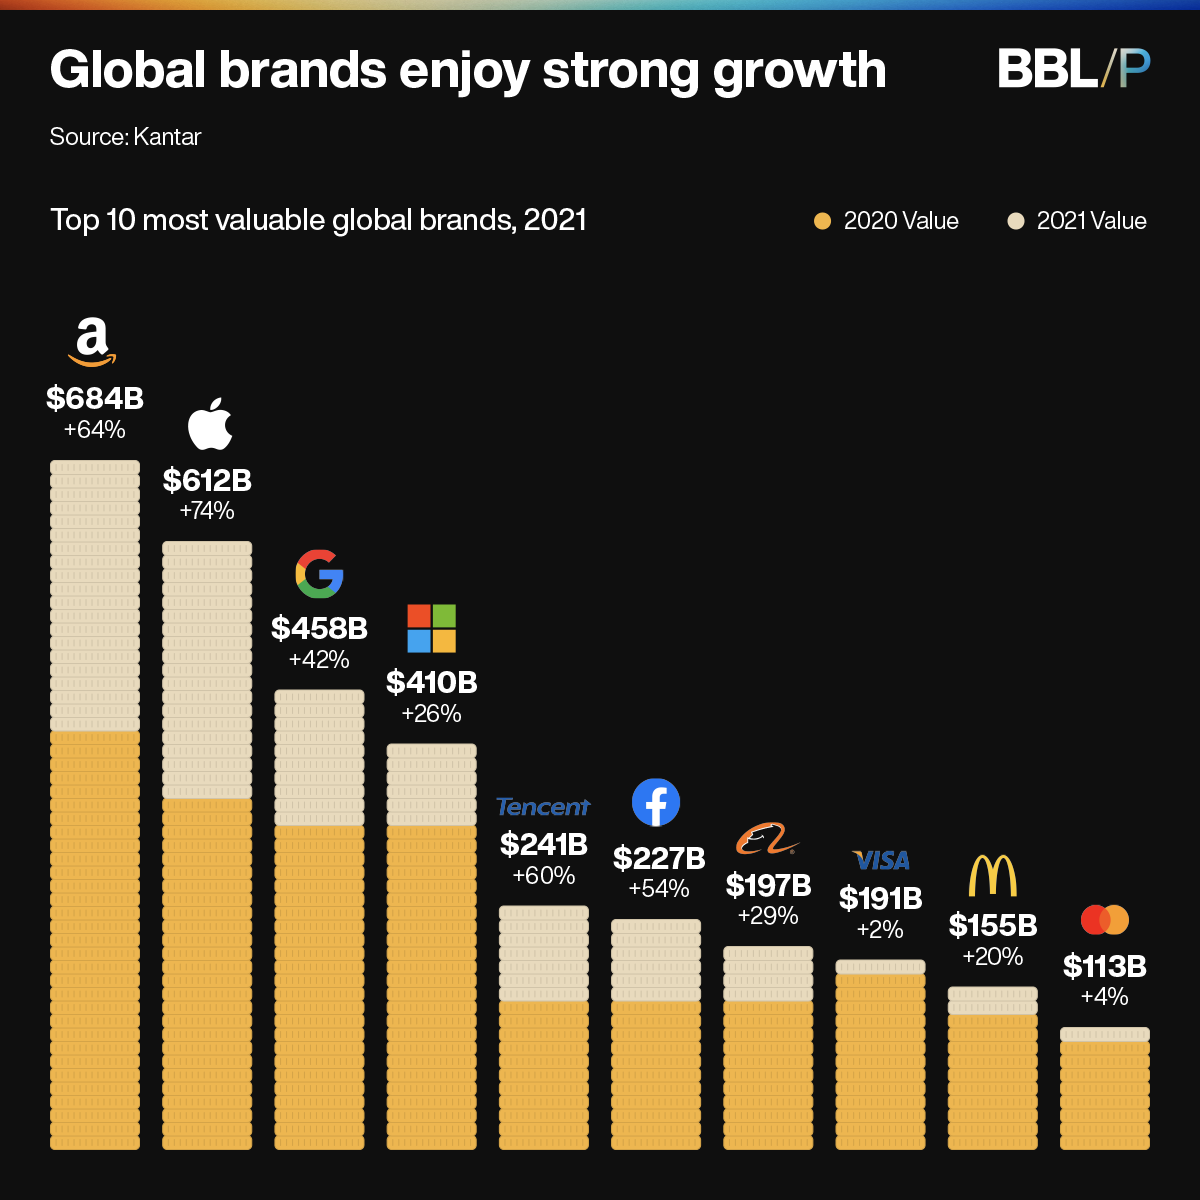 Global brands enjoy strong growth